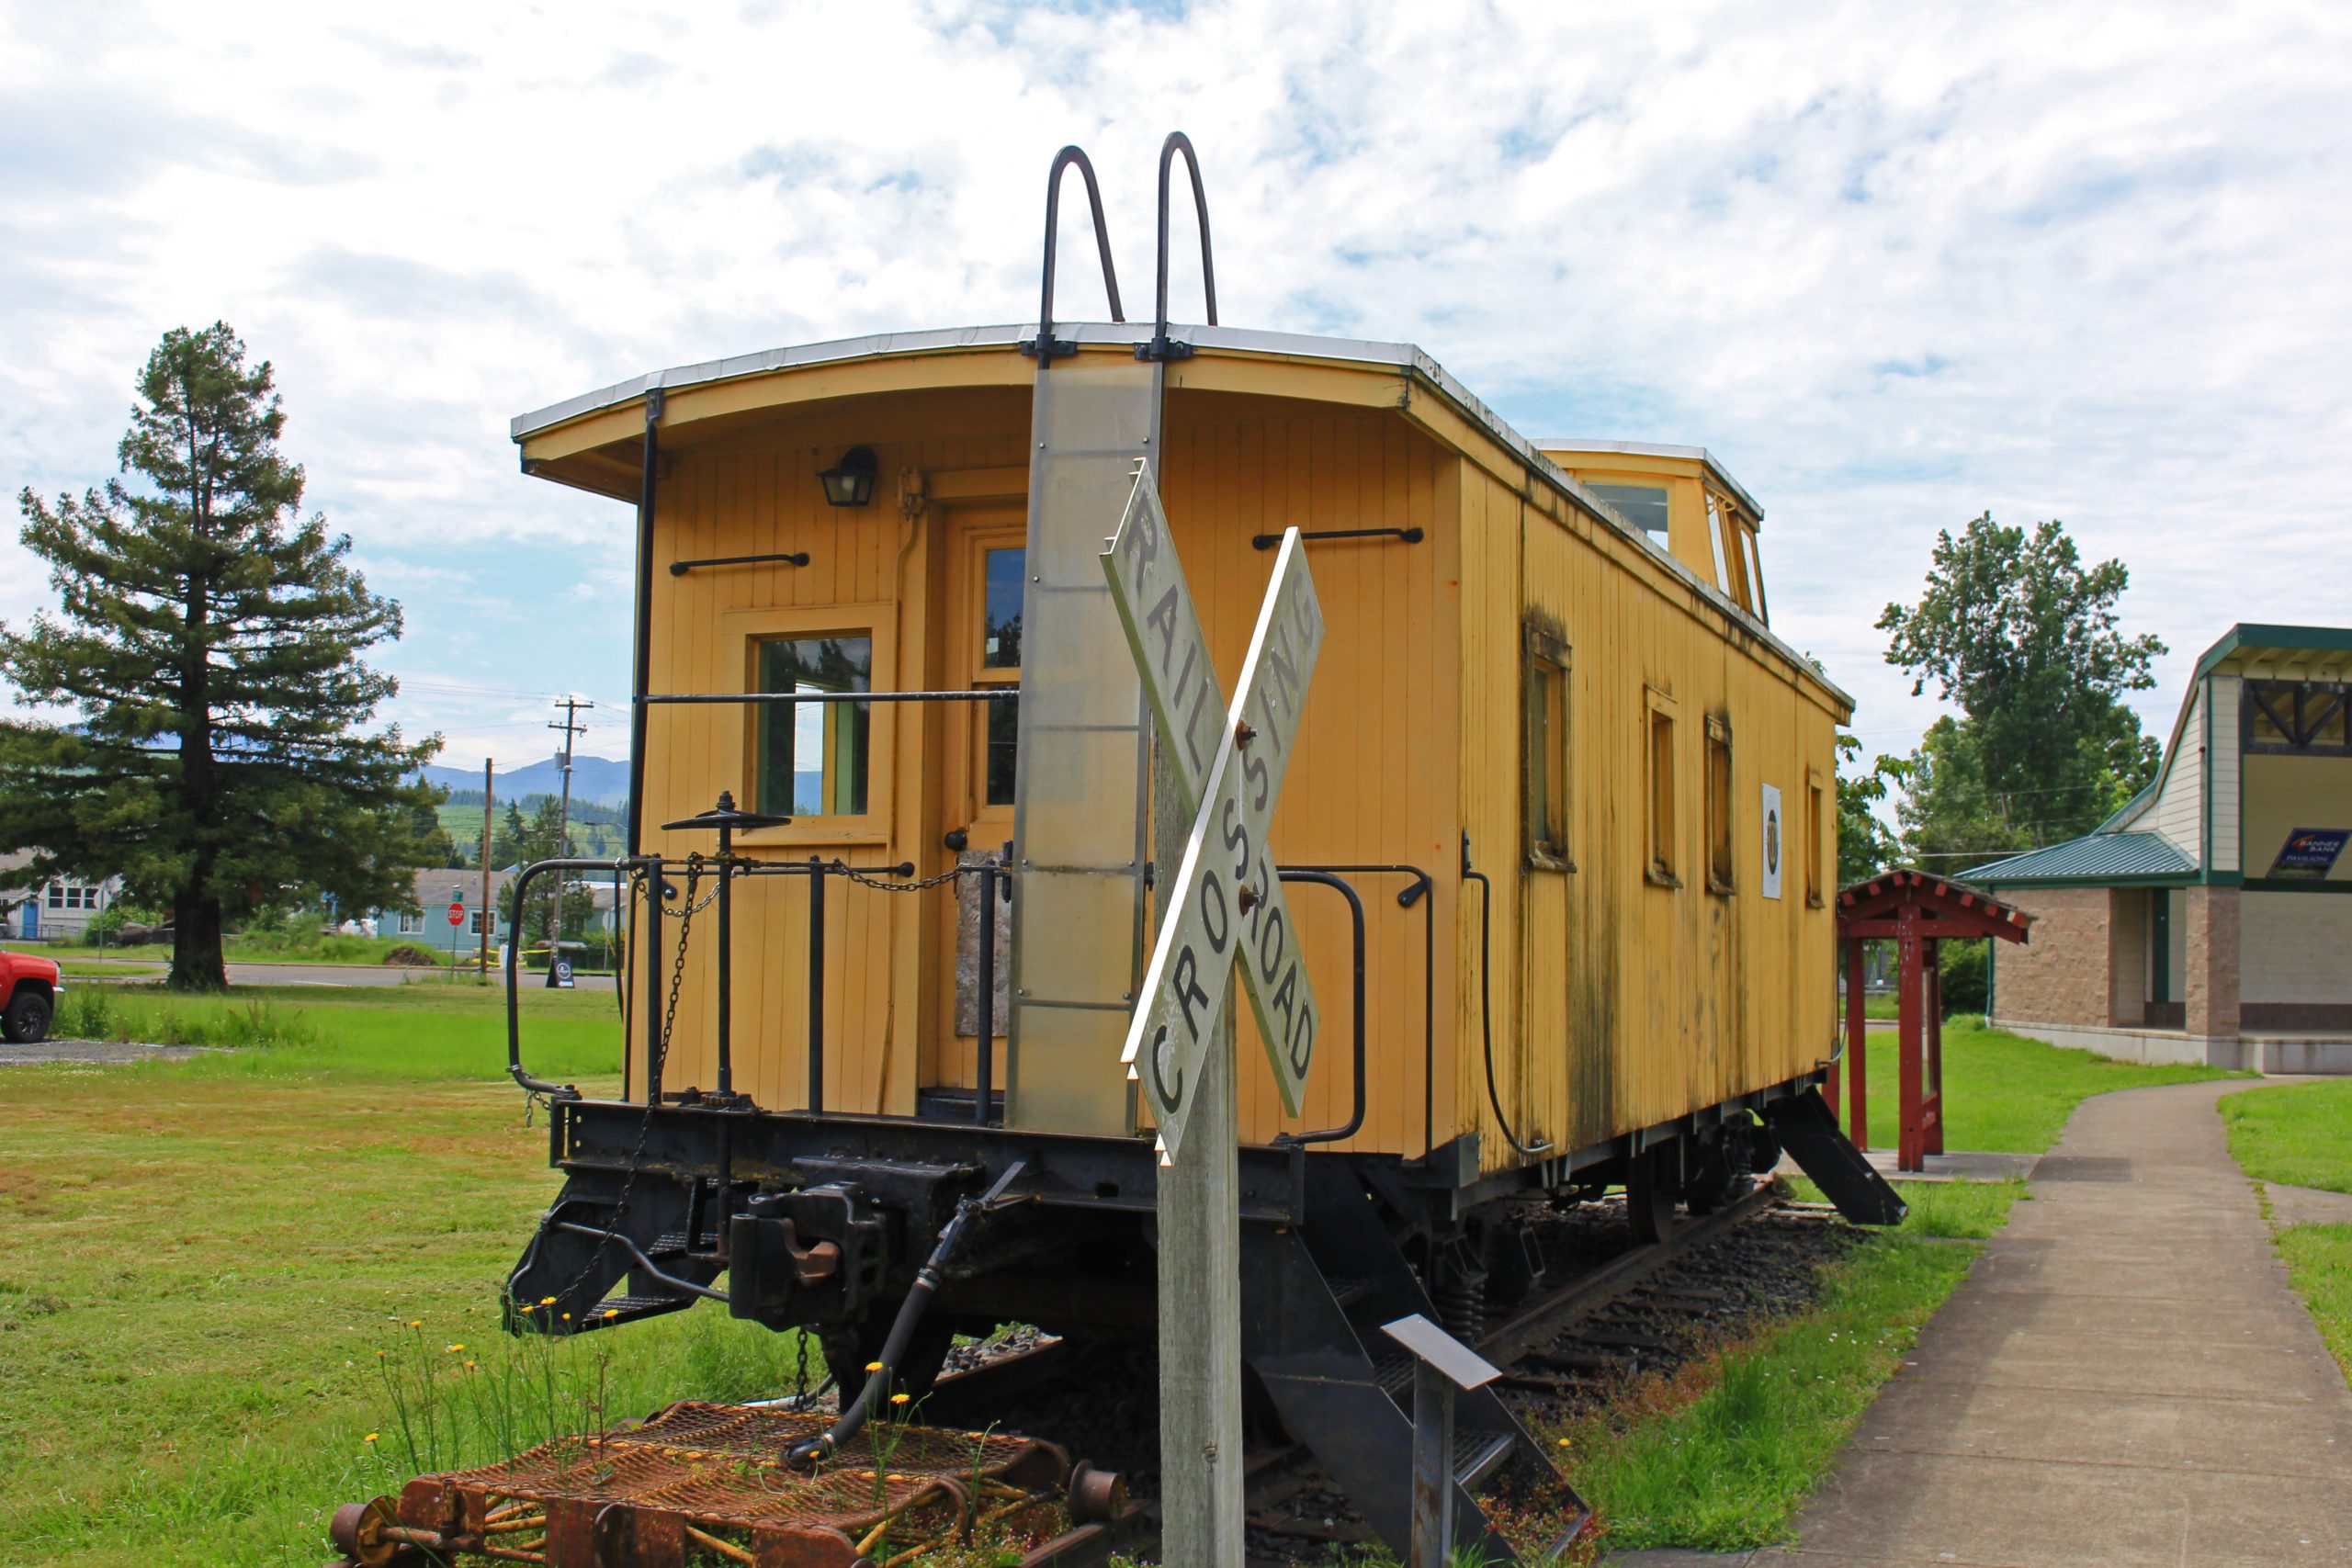 The Caboose….